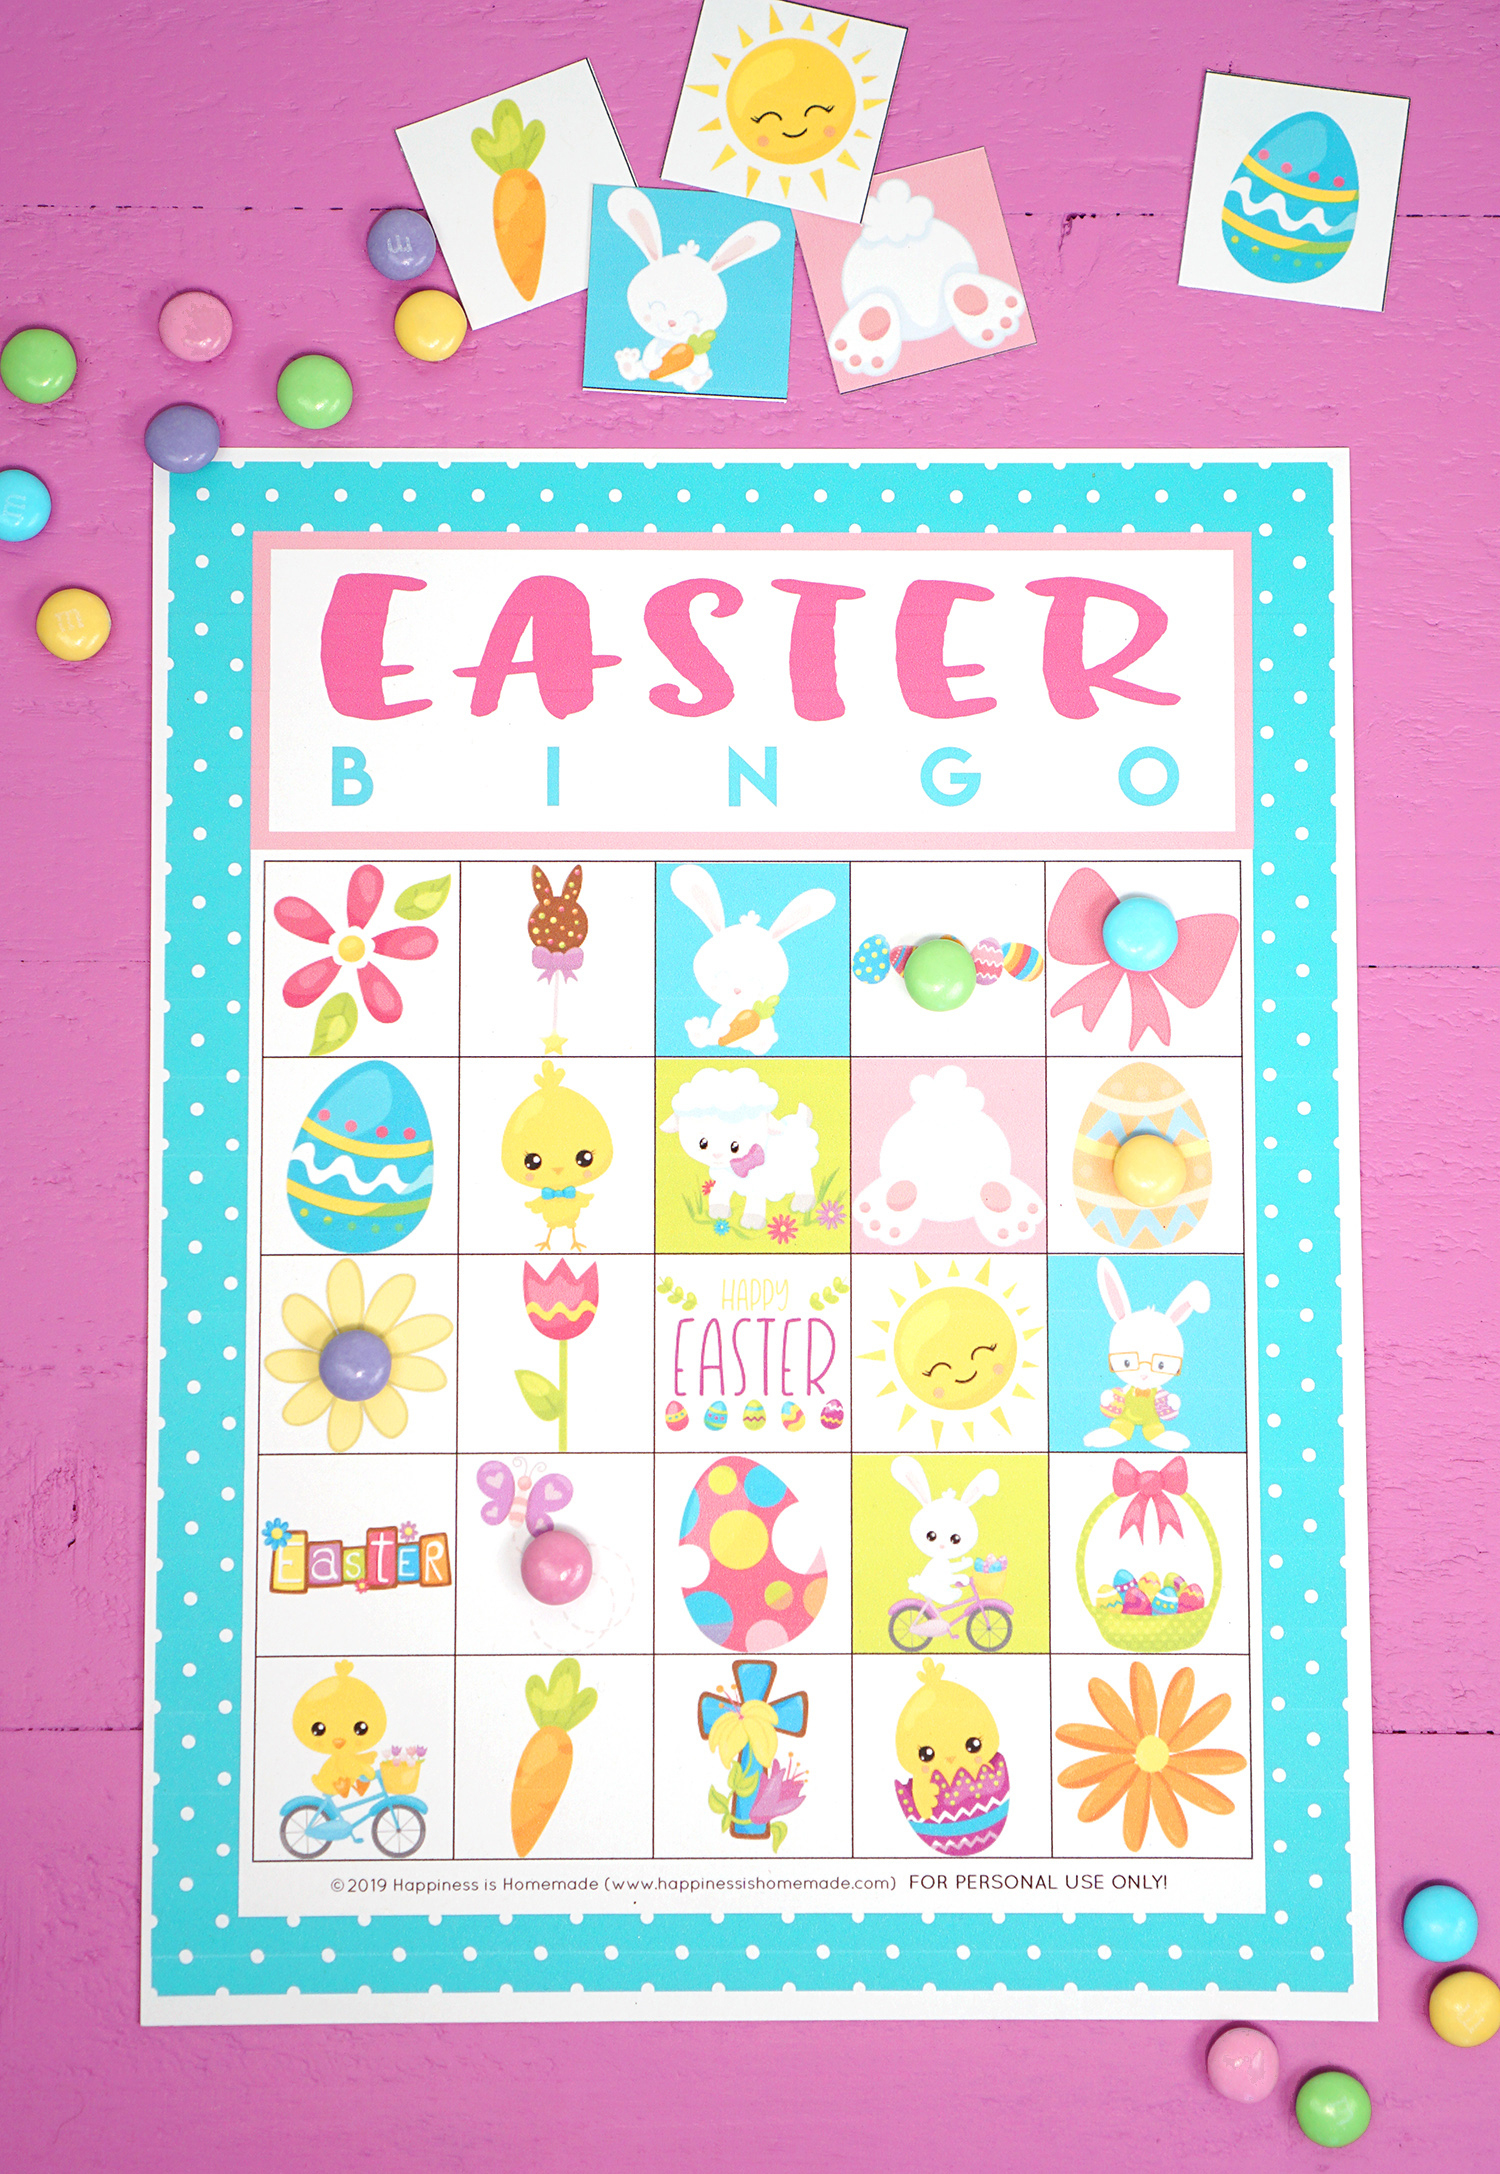 Free Printable Easter Bingo Game Cards - Happiness Is Homemade